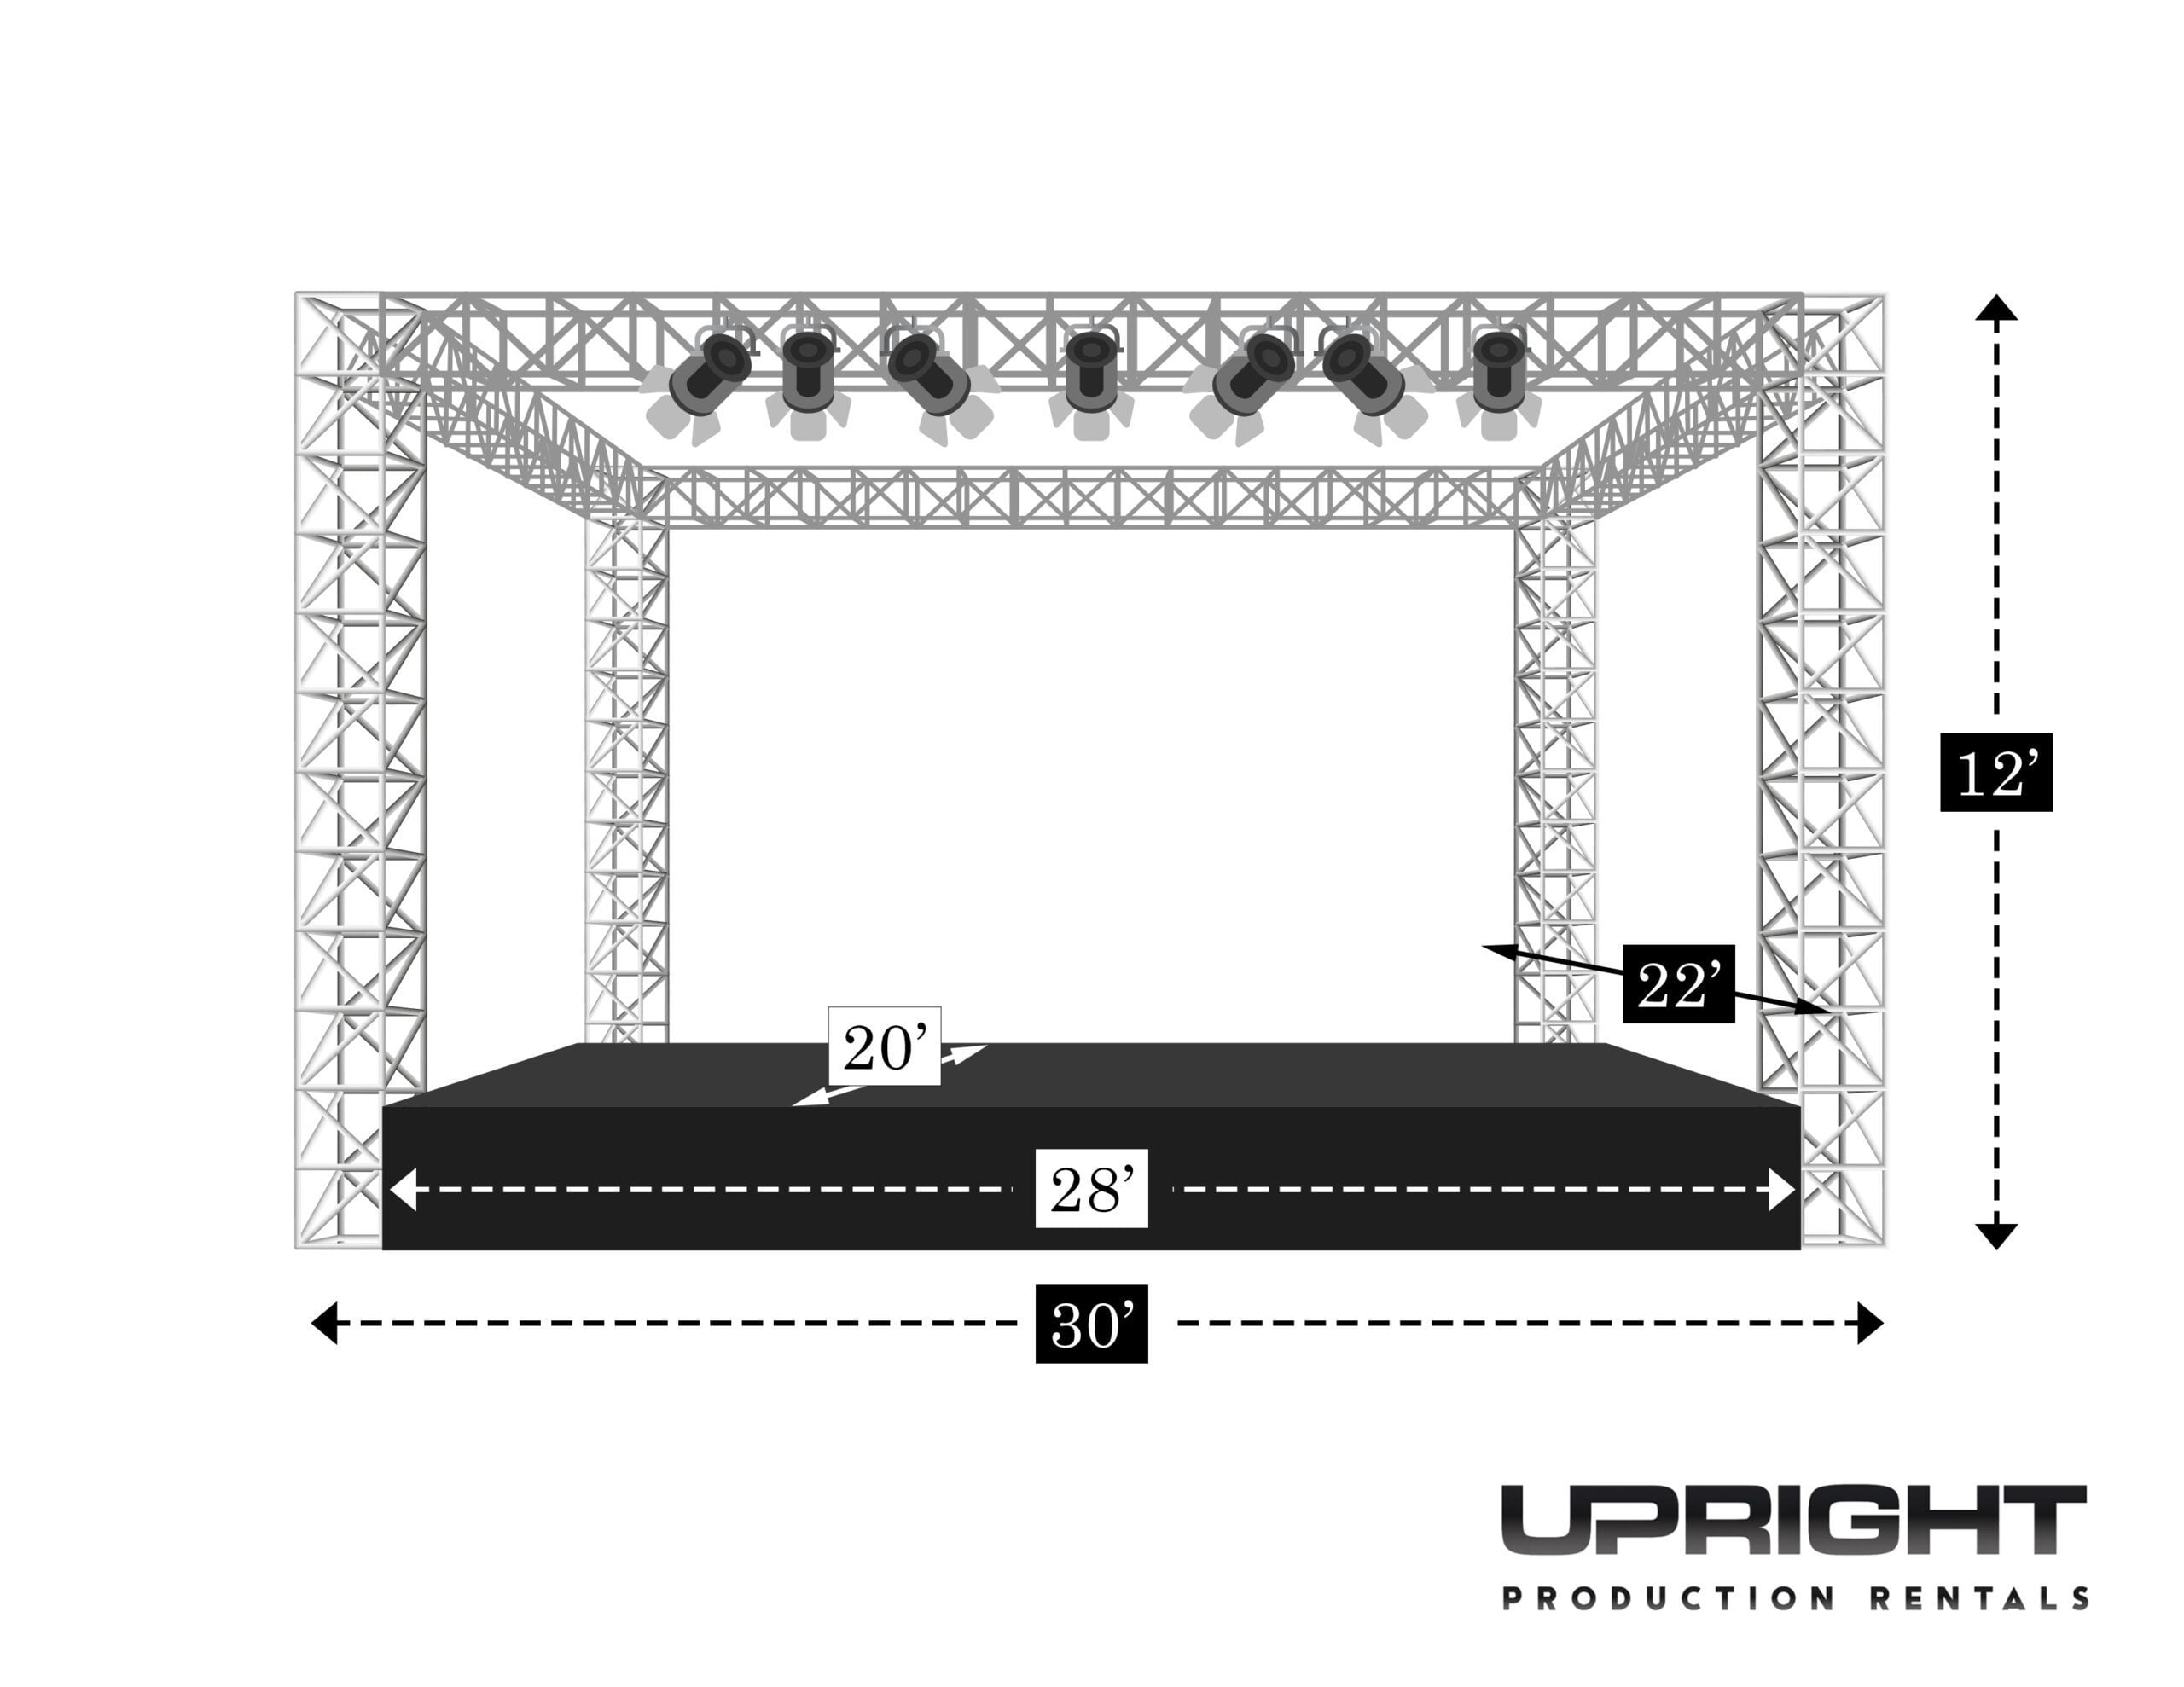 Truss structure stage 30 * 22 * 12